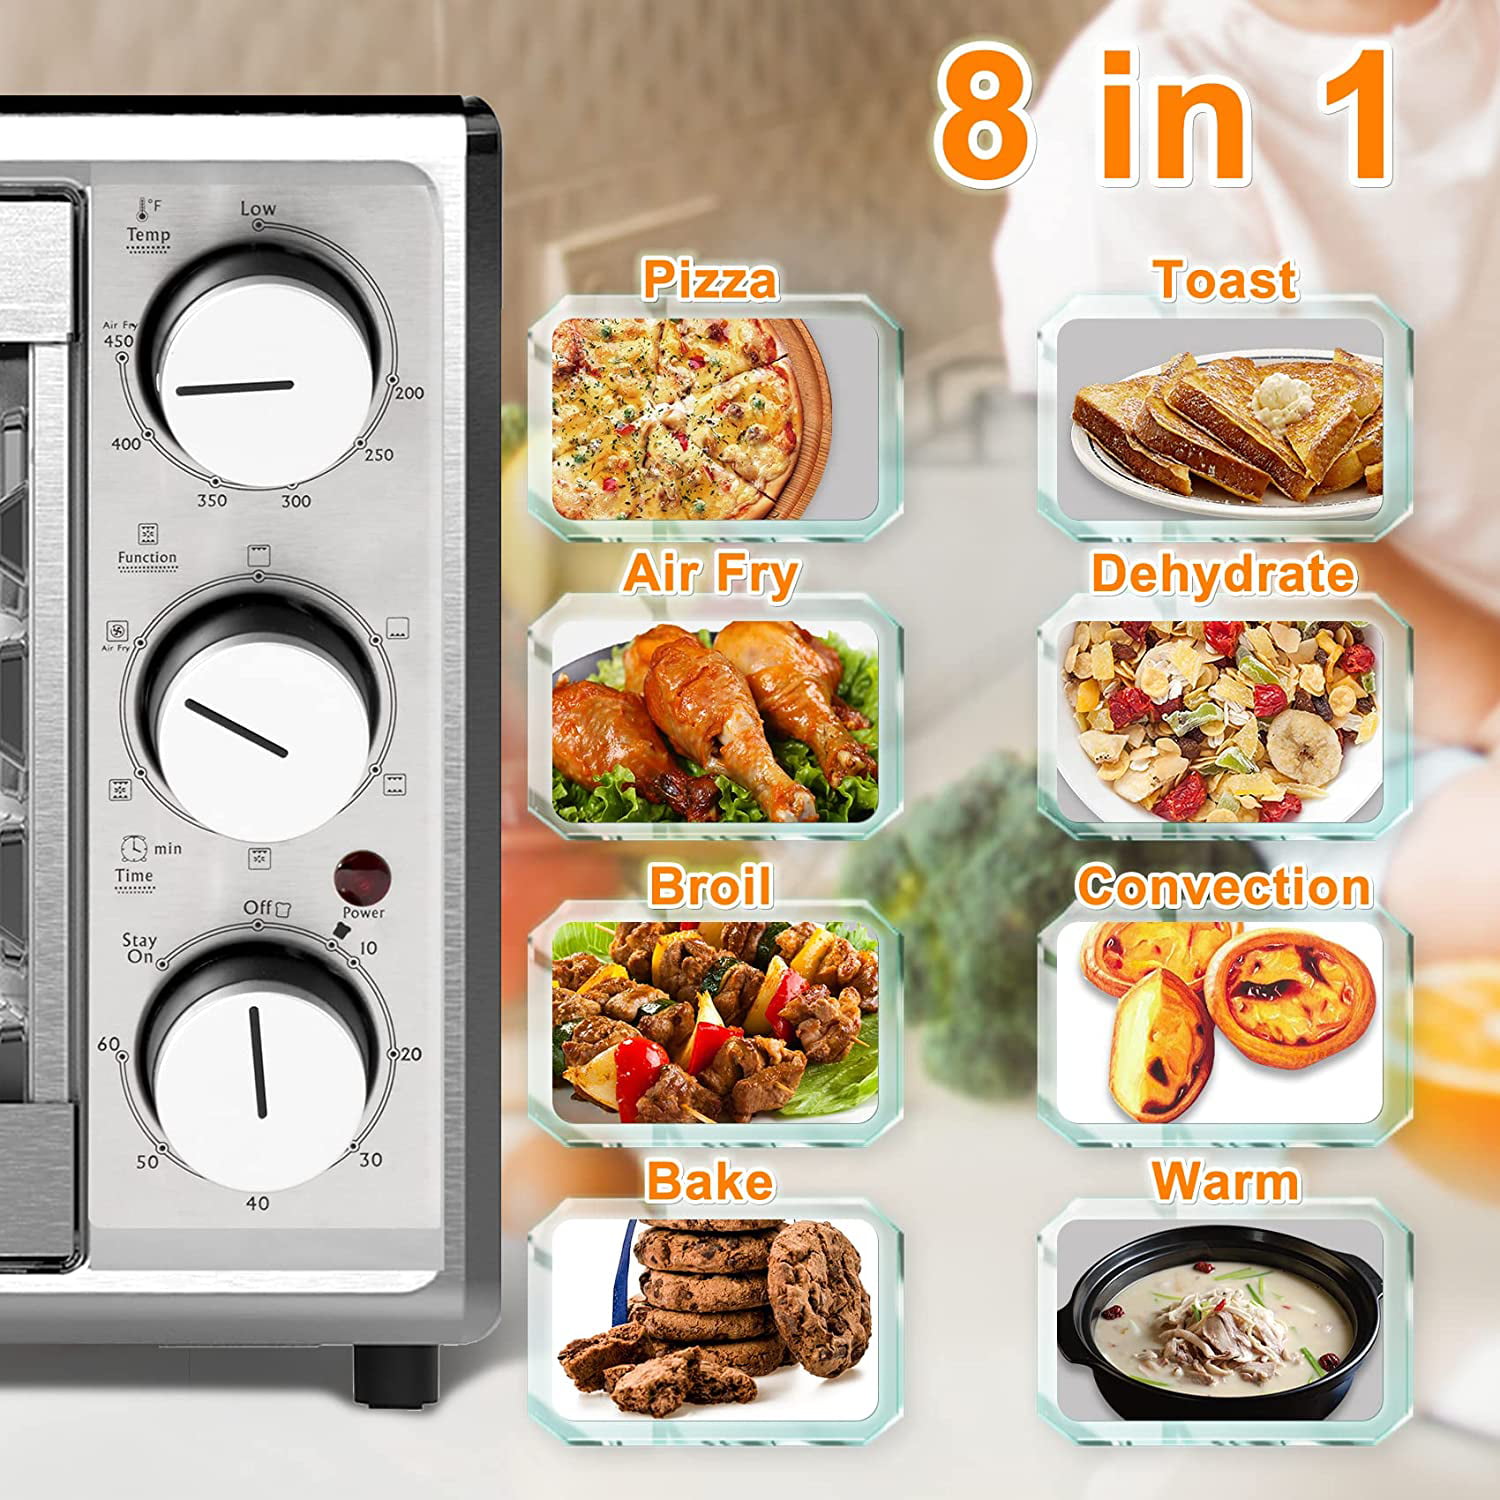 Val Cucina 10-in-1 Smart Air Fryer - Extra-Large Convection Countertop Toaster Oven, 6-Slice Toast, 12-Inch Pizza, Cream, White